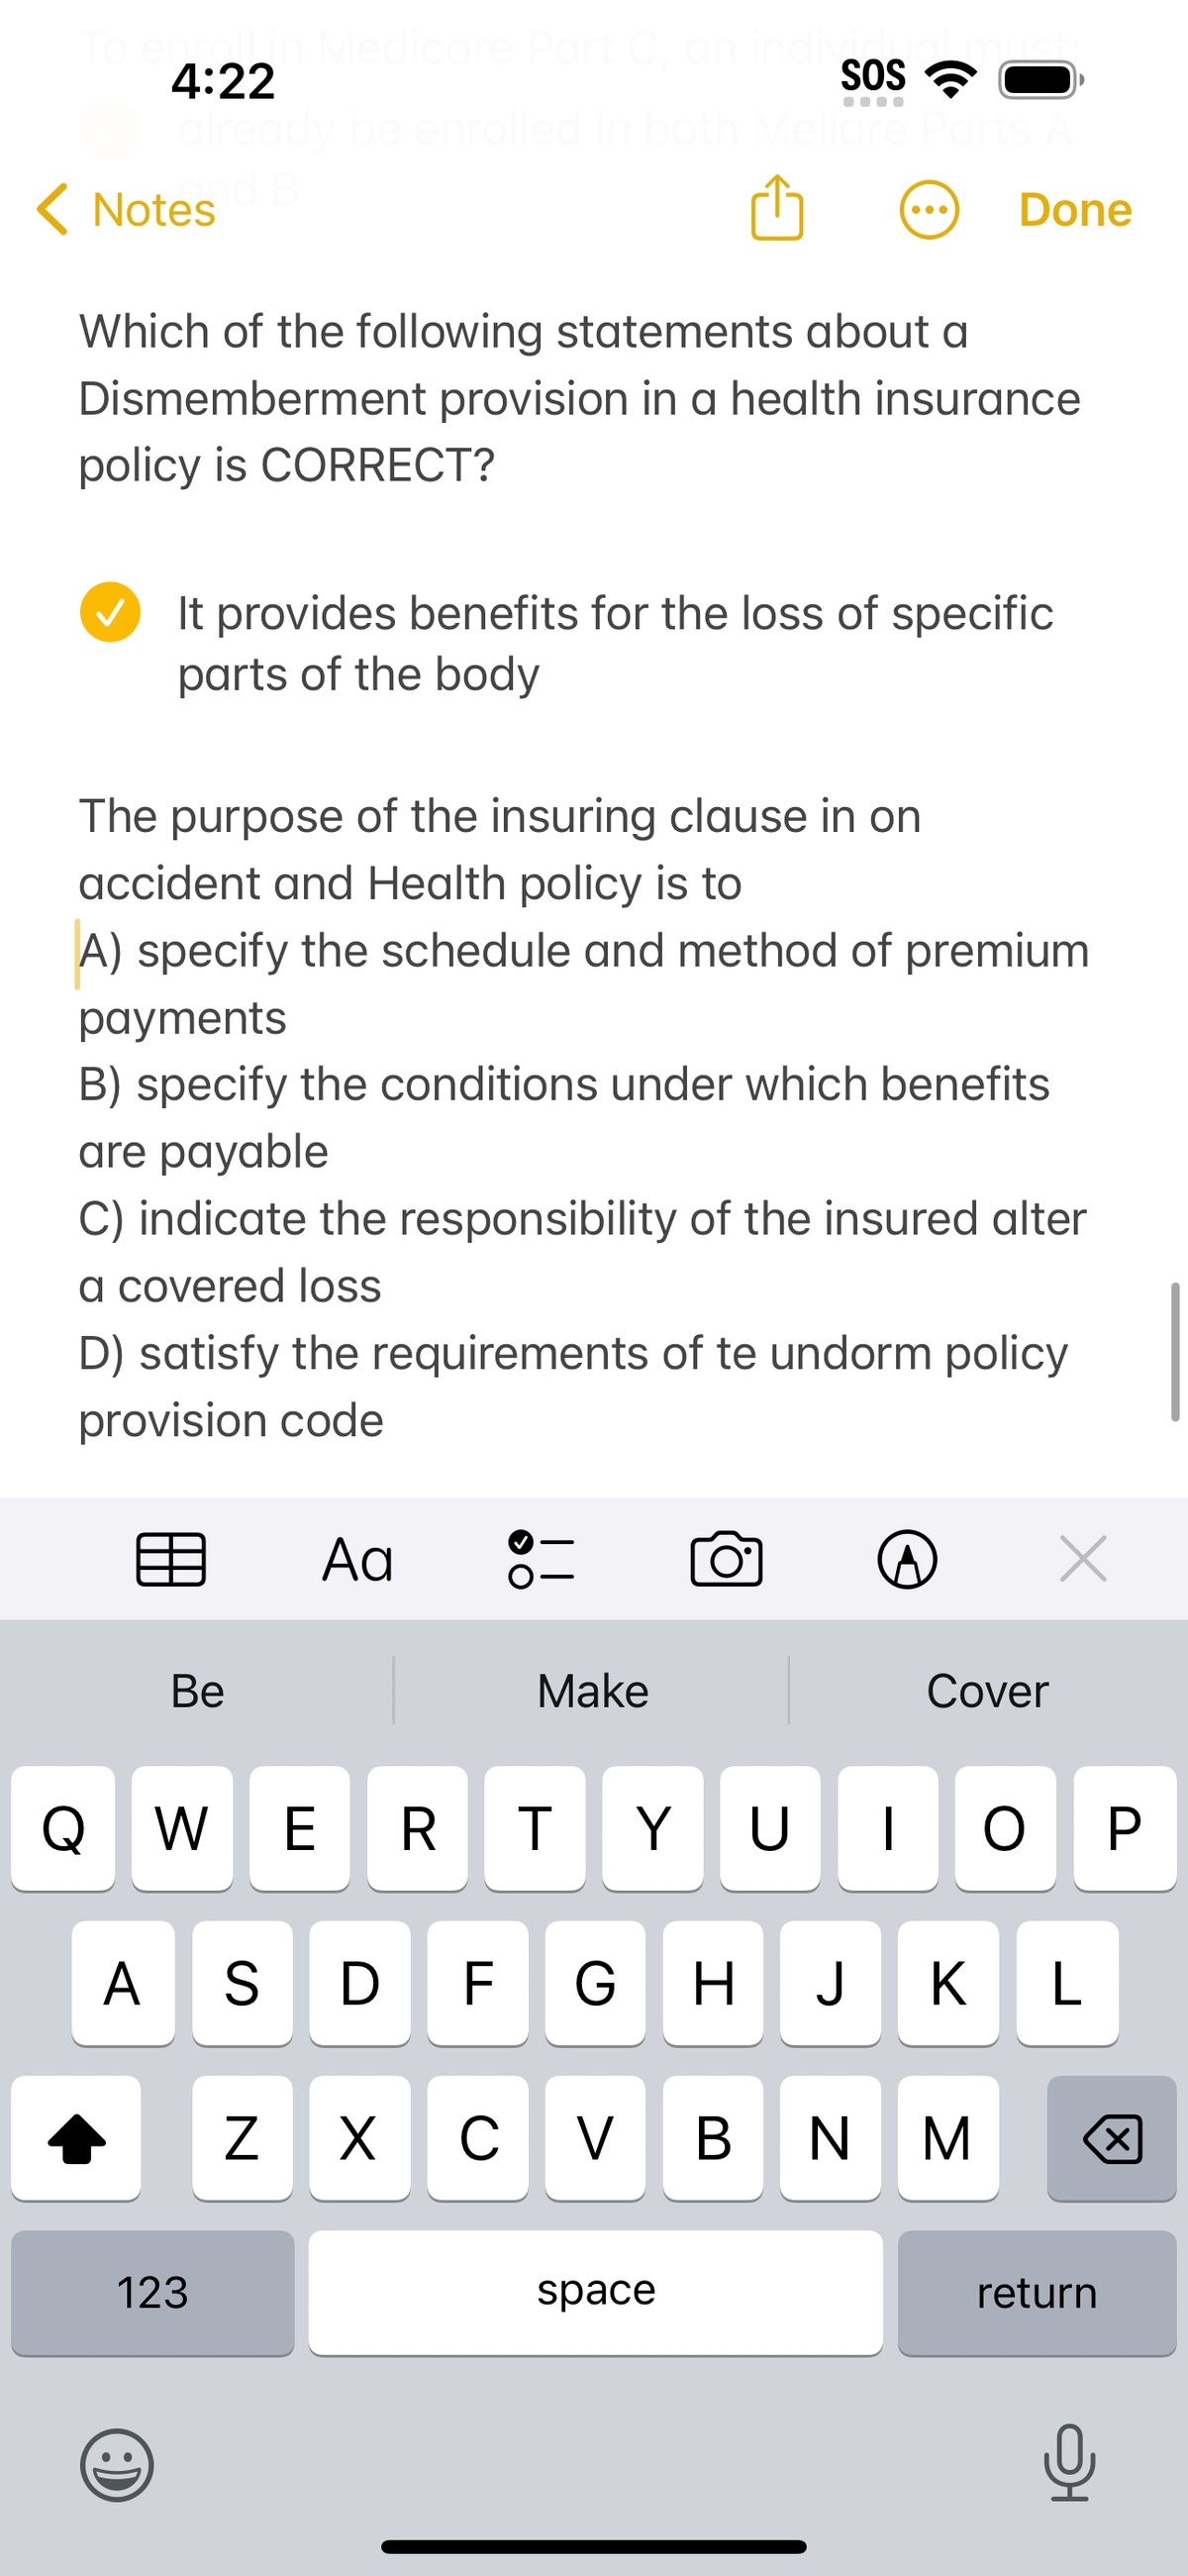 To enrol in Medicare Part C, ar
4:22
be enrolled in both
and B
< Notes
Which of the following statements about a
Dismemberment provision in a health insurance
policy is CORRECT?
It provides benefits for the loss of specific
parts of the body
Be
The purpose of the insuring clause in on
accident and Health policy is to
A) specify the schedule and method of premium
payments
B) specify the conditions under which benefits
are payable
C) indicate the responsibility of the insured alter
a covered loss
D) satisfy the requirements of te undorm policy
provision code
123
dive
SOS
liare Parts A
Ad
N
●●●
||
Make
Done
space
O° ^
Q W WE RTYUIOP
A S D F G H J K L
XCVBNM
Cover
x
return
Q
X